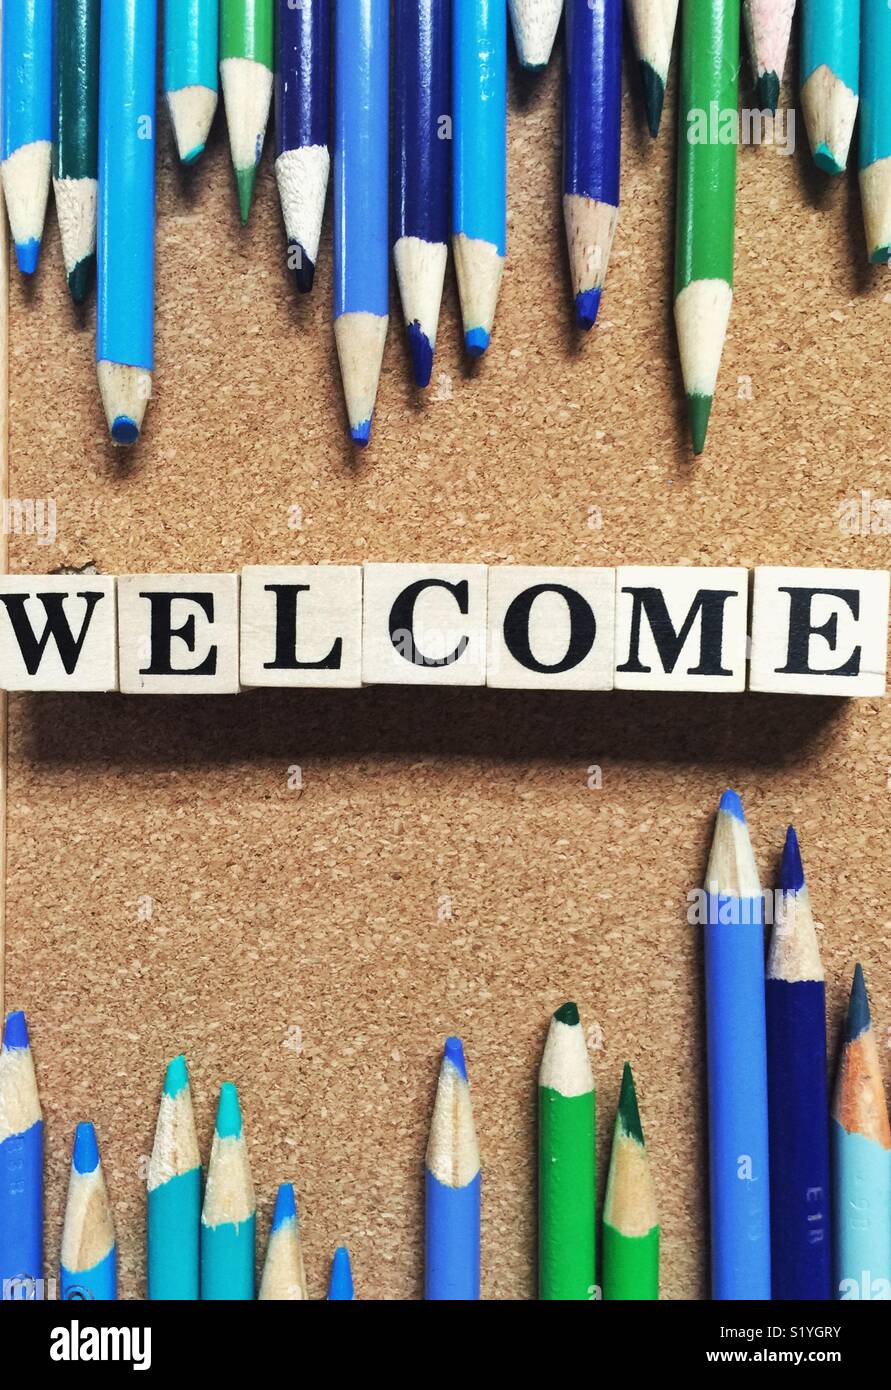 Welcome sign crafted on cork board with colored pencils and wooden blocks Stock Photo